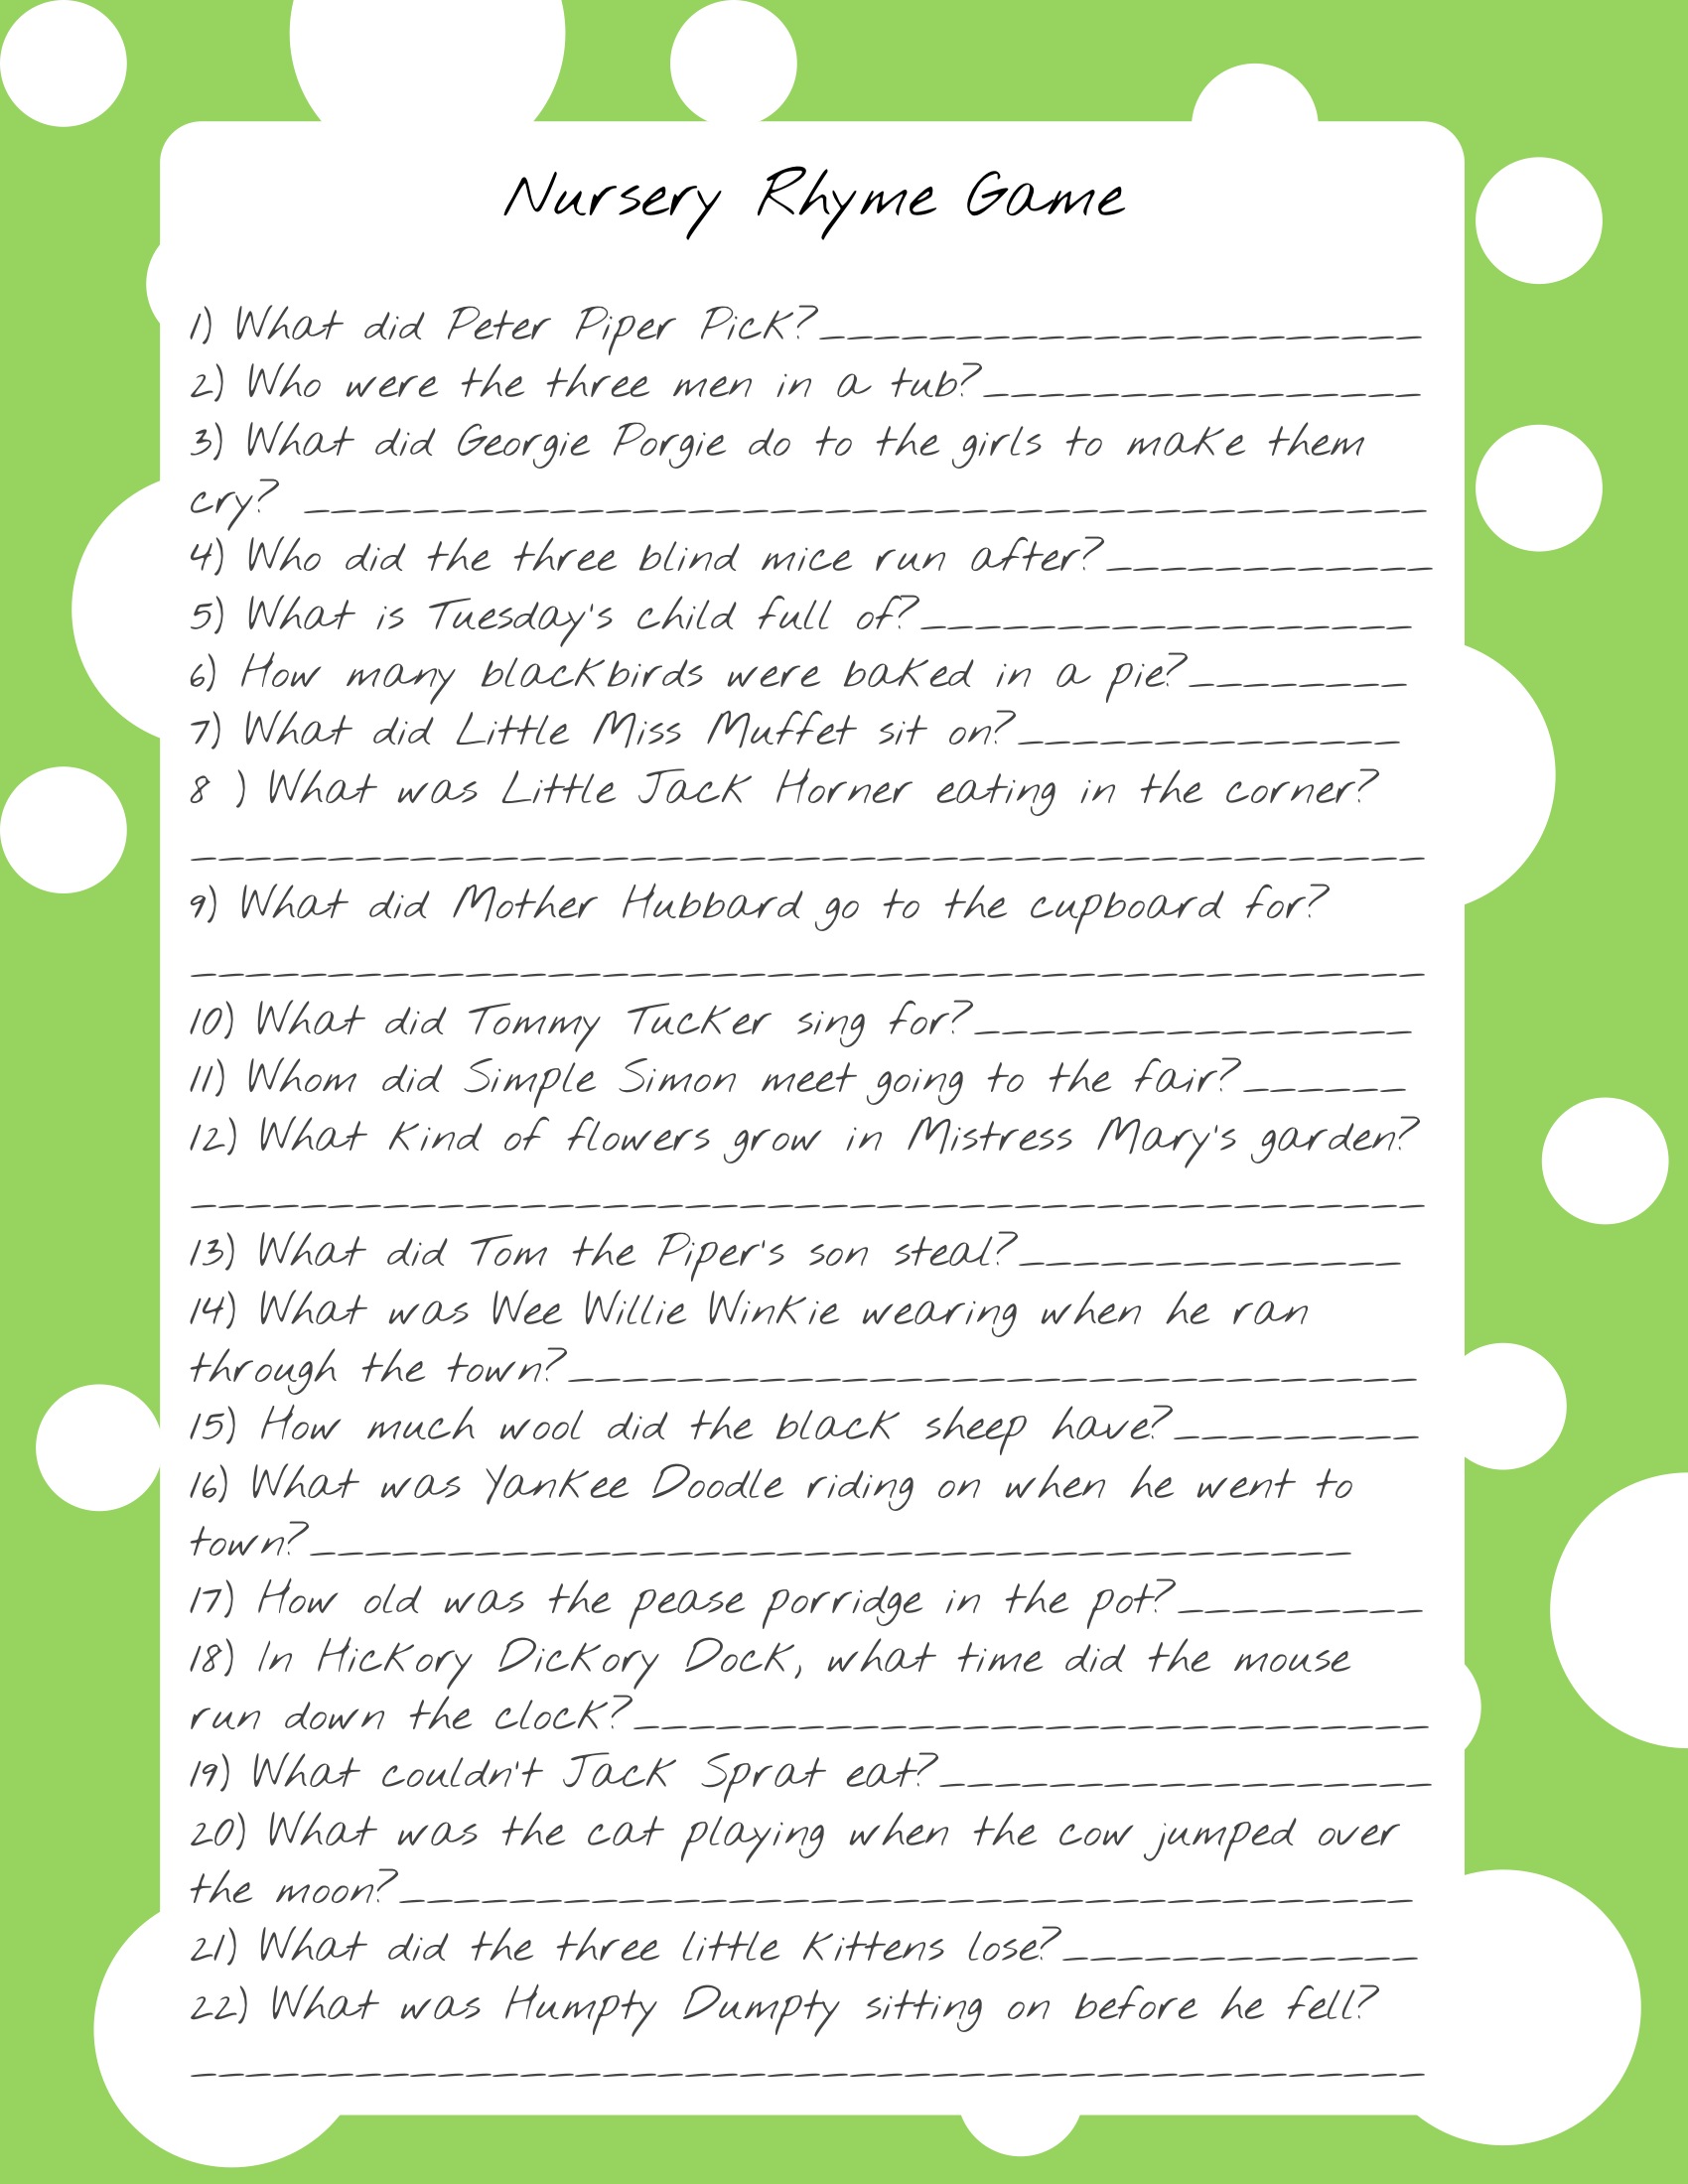 8-best-images-of-nursery-rhyme-game-printable-with-answers-baby